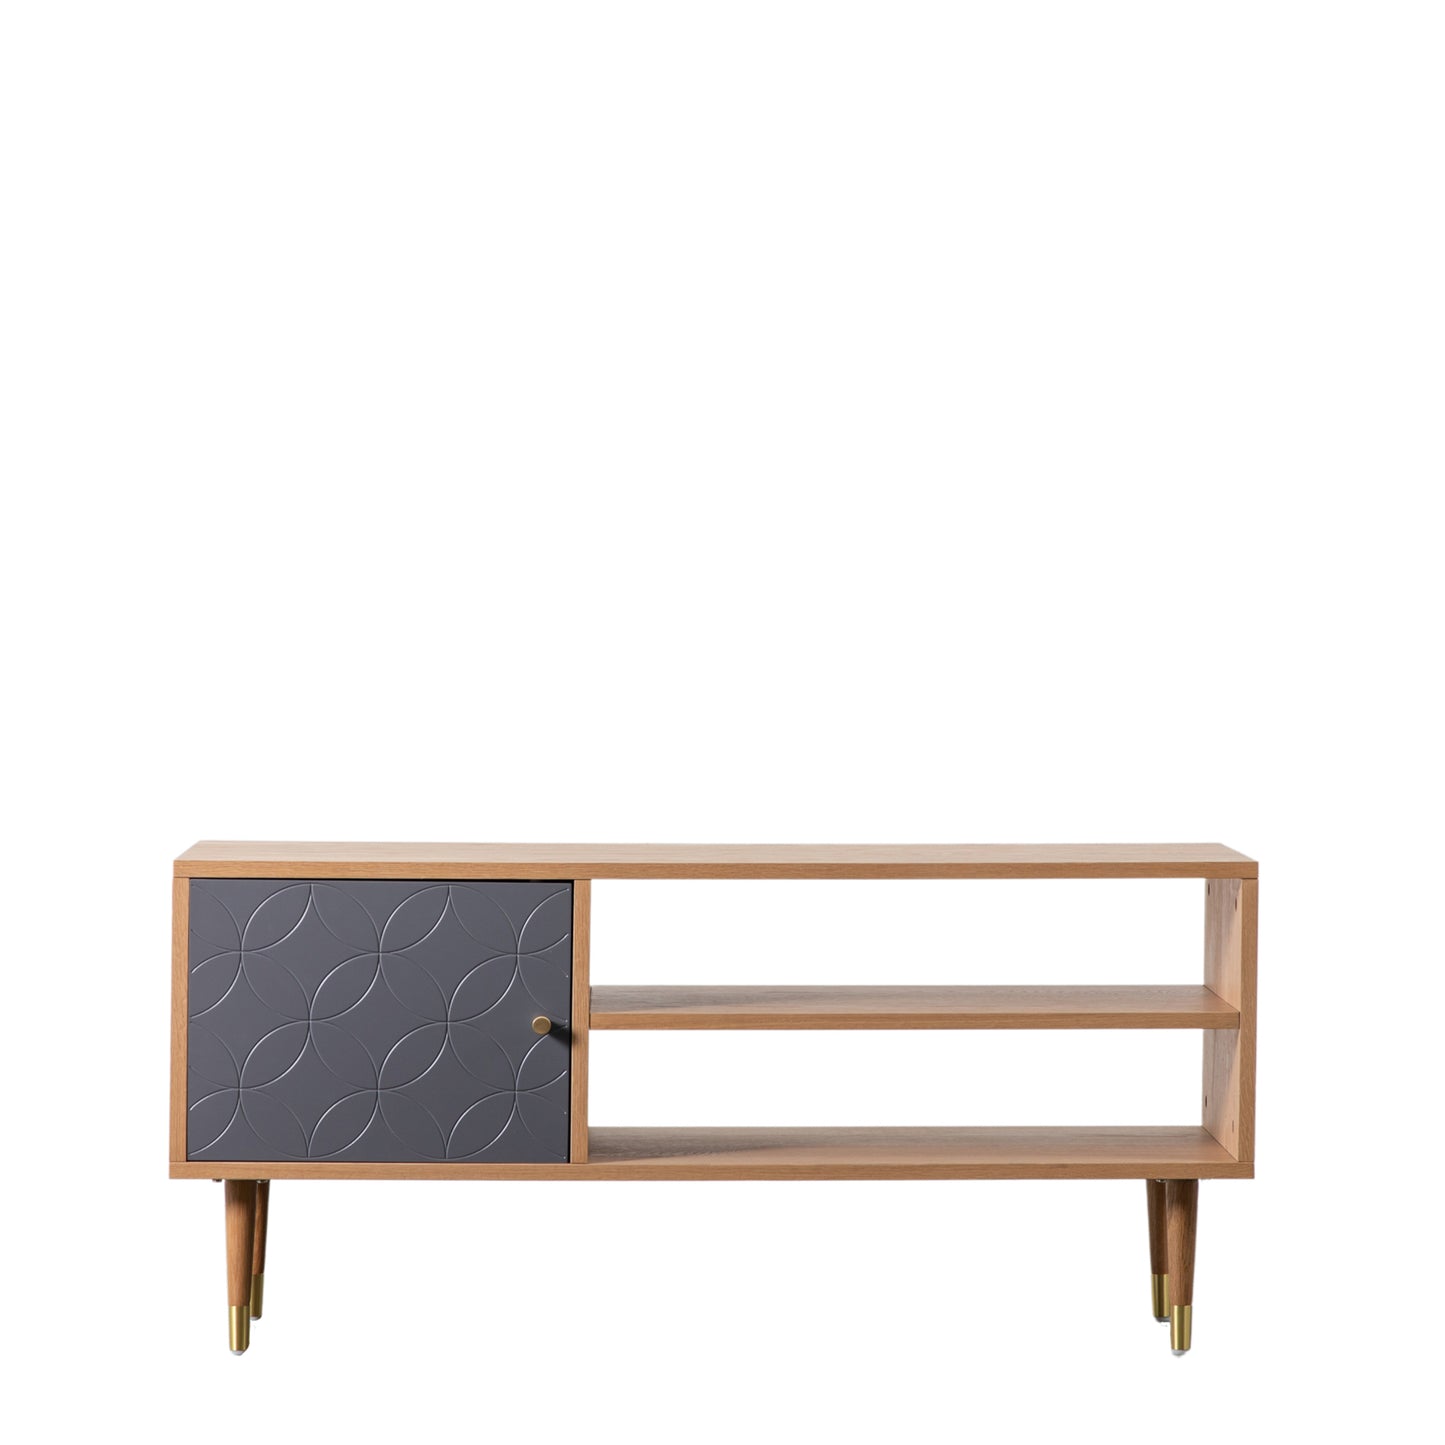 A sleek and stylish Newbury Media Unit in Oak Grey with black legs, perfect for home furniture and interior decor.